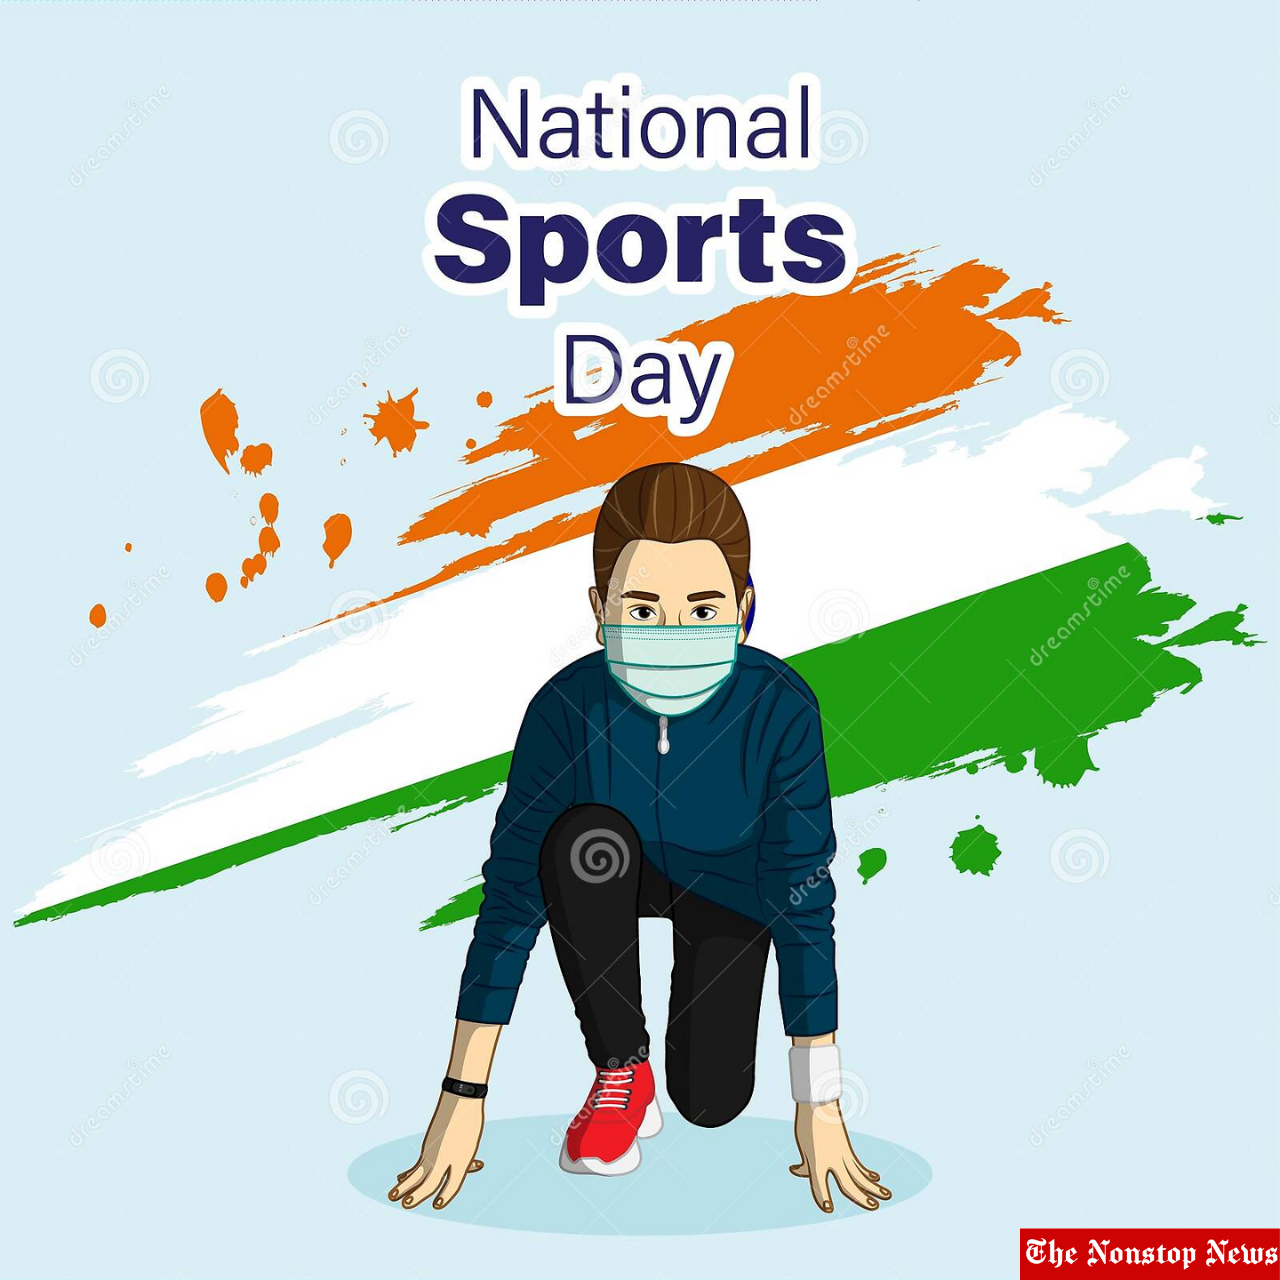 National Sports Day 2022: Drawings, Posters, Images, Messages, Quotes, Greetings, Wishes to share